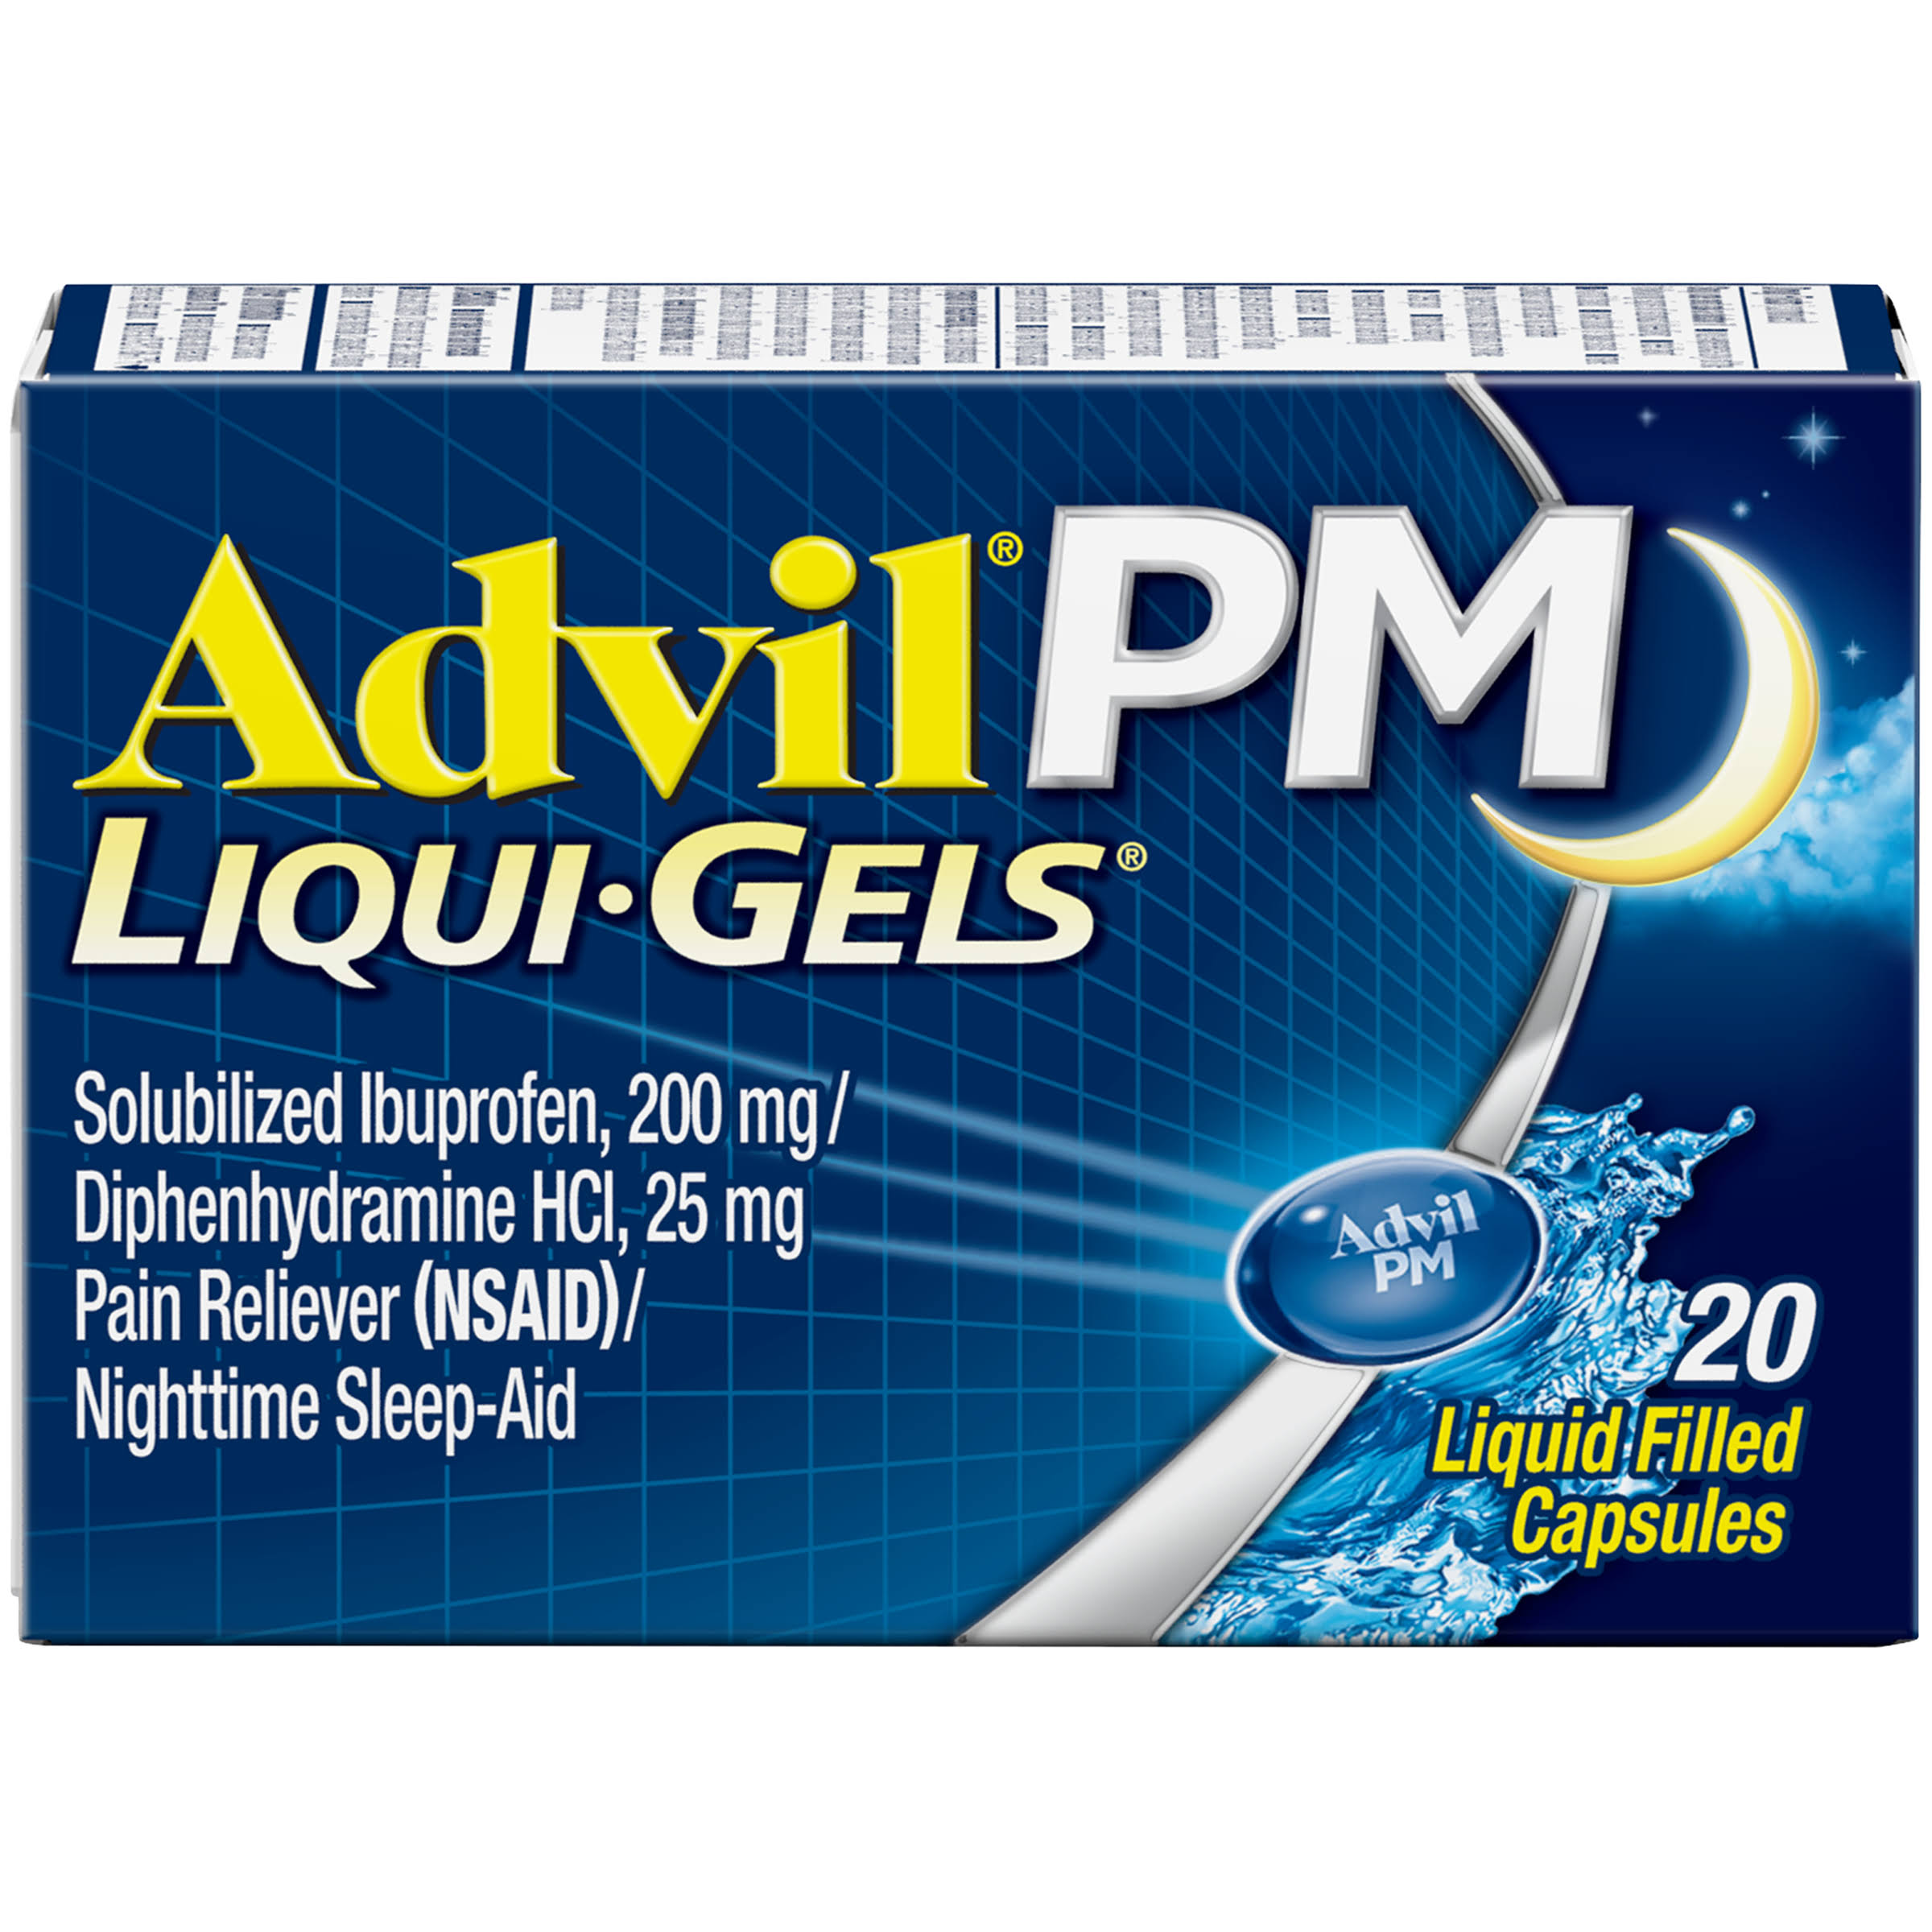 Advil PM Liqui Gels Pain Relief and Nighttime Sleep Aid Capsules - 20ct